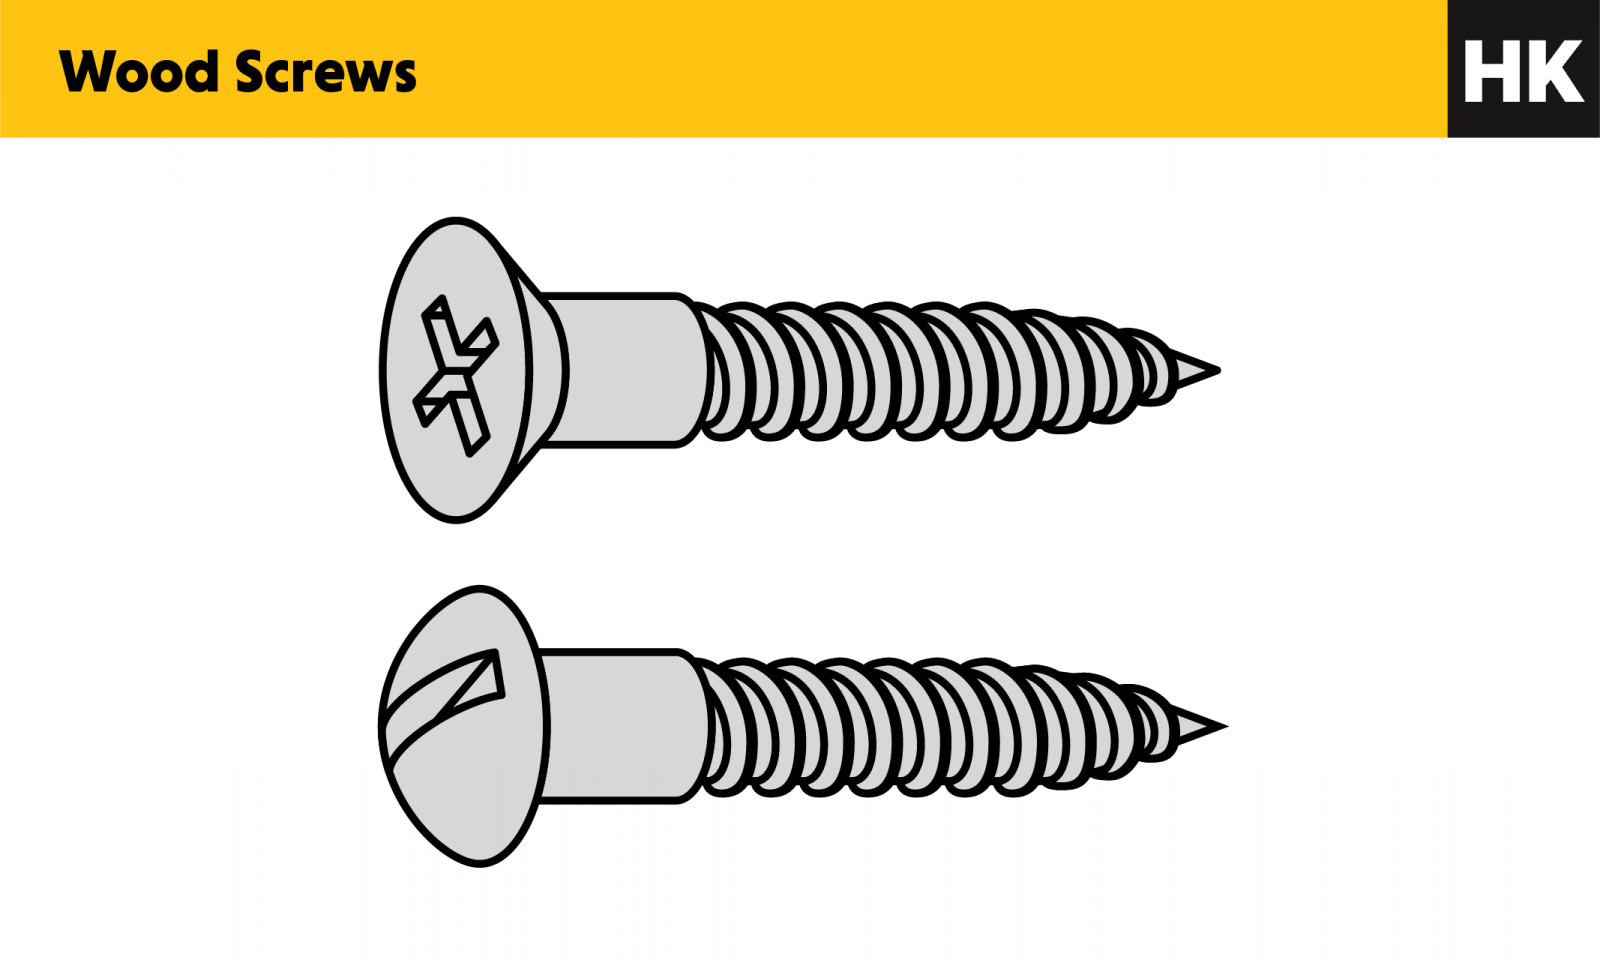 Fasteners: Types, Uses and More